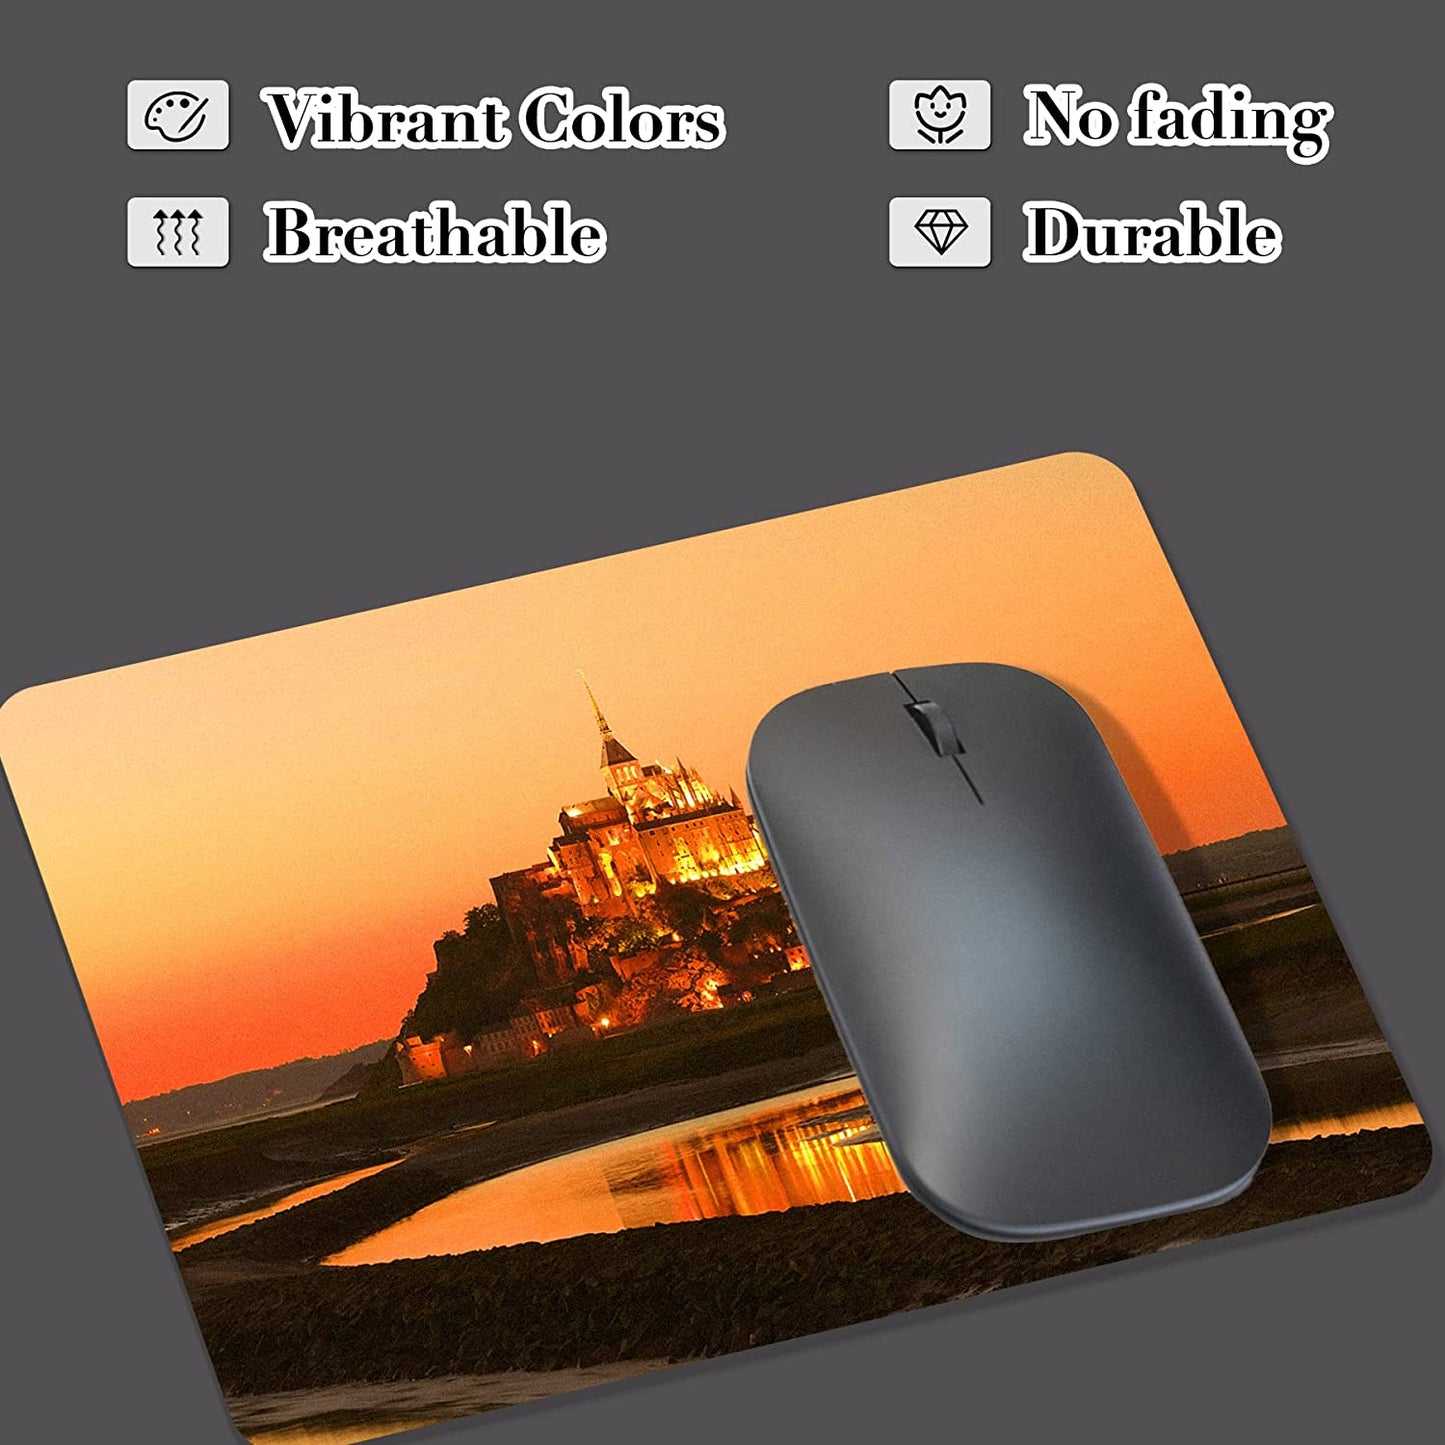 A-SUB Sublimation Mouse Pad Blanks for Heat Transfer Printing 9.4x7.9x0.12 Inches 11PCS